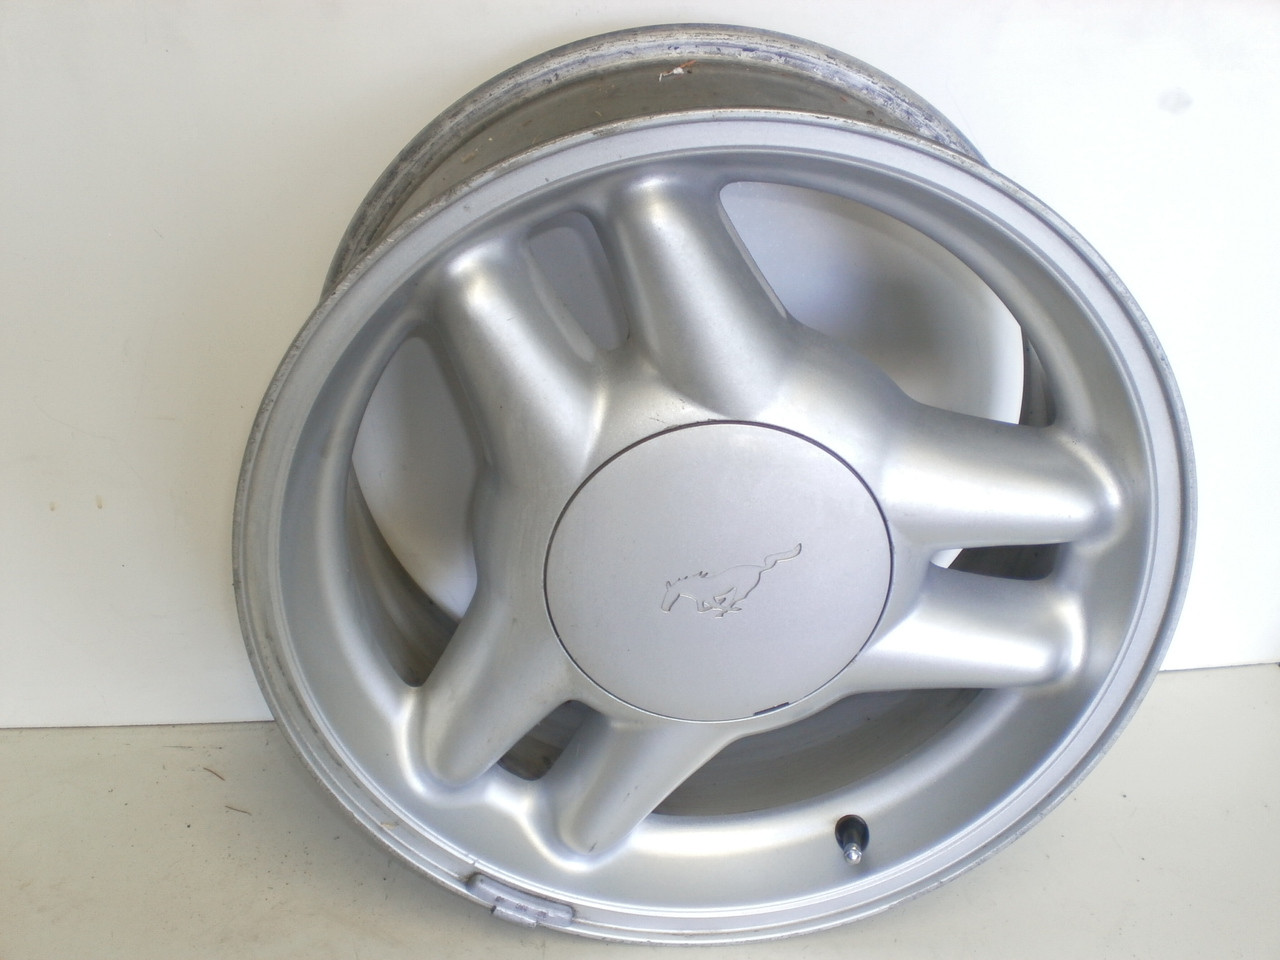 1994-2004 Ford Mustang 96-98 Wheel 15 x 7 inch